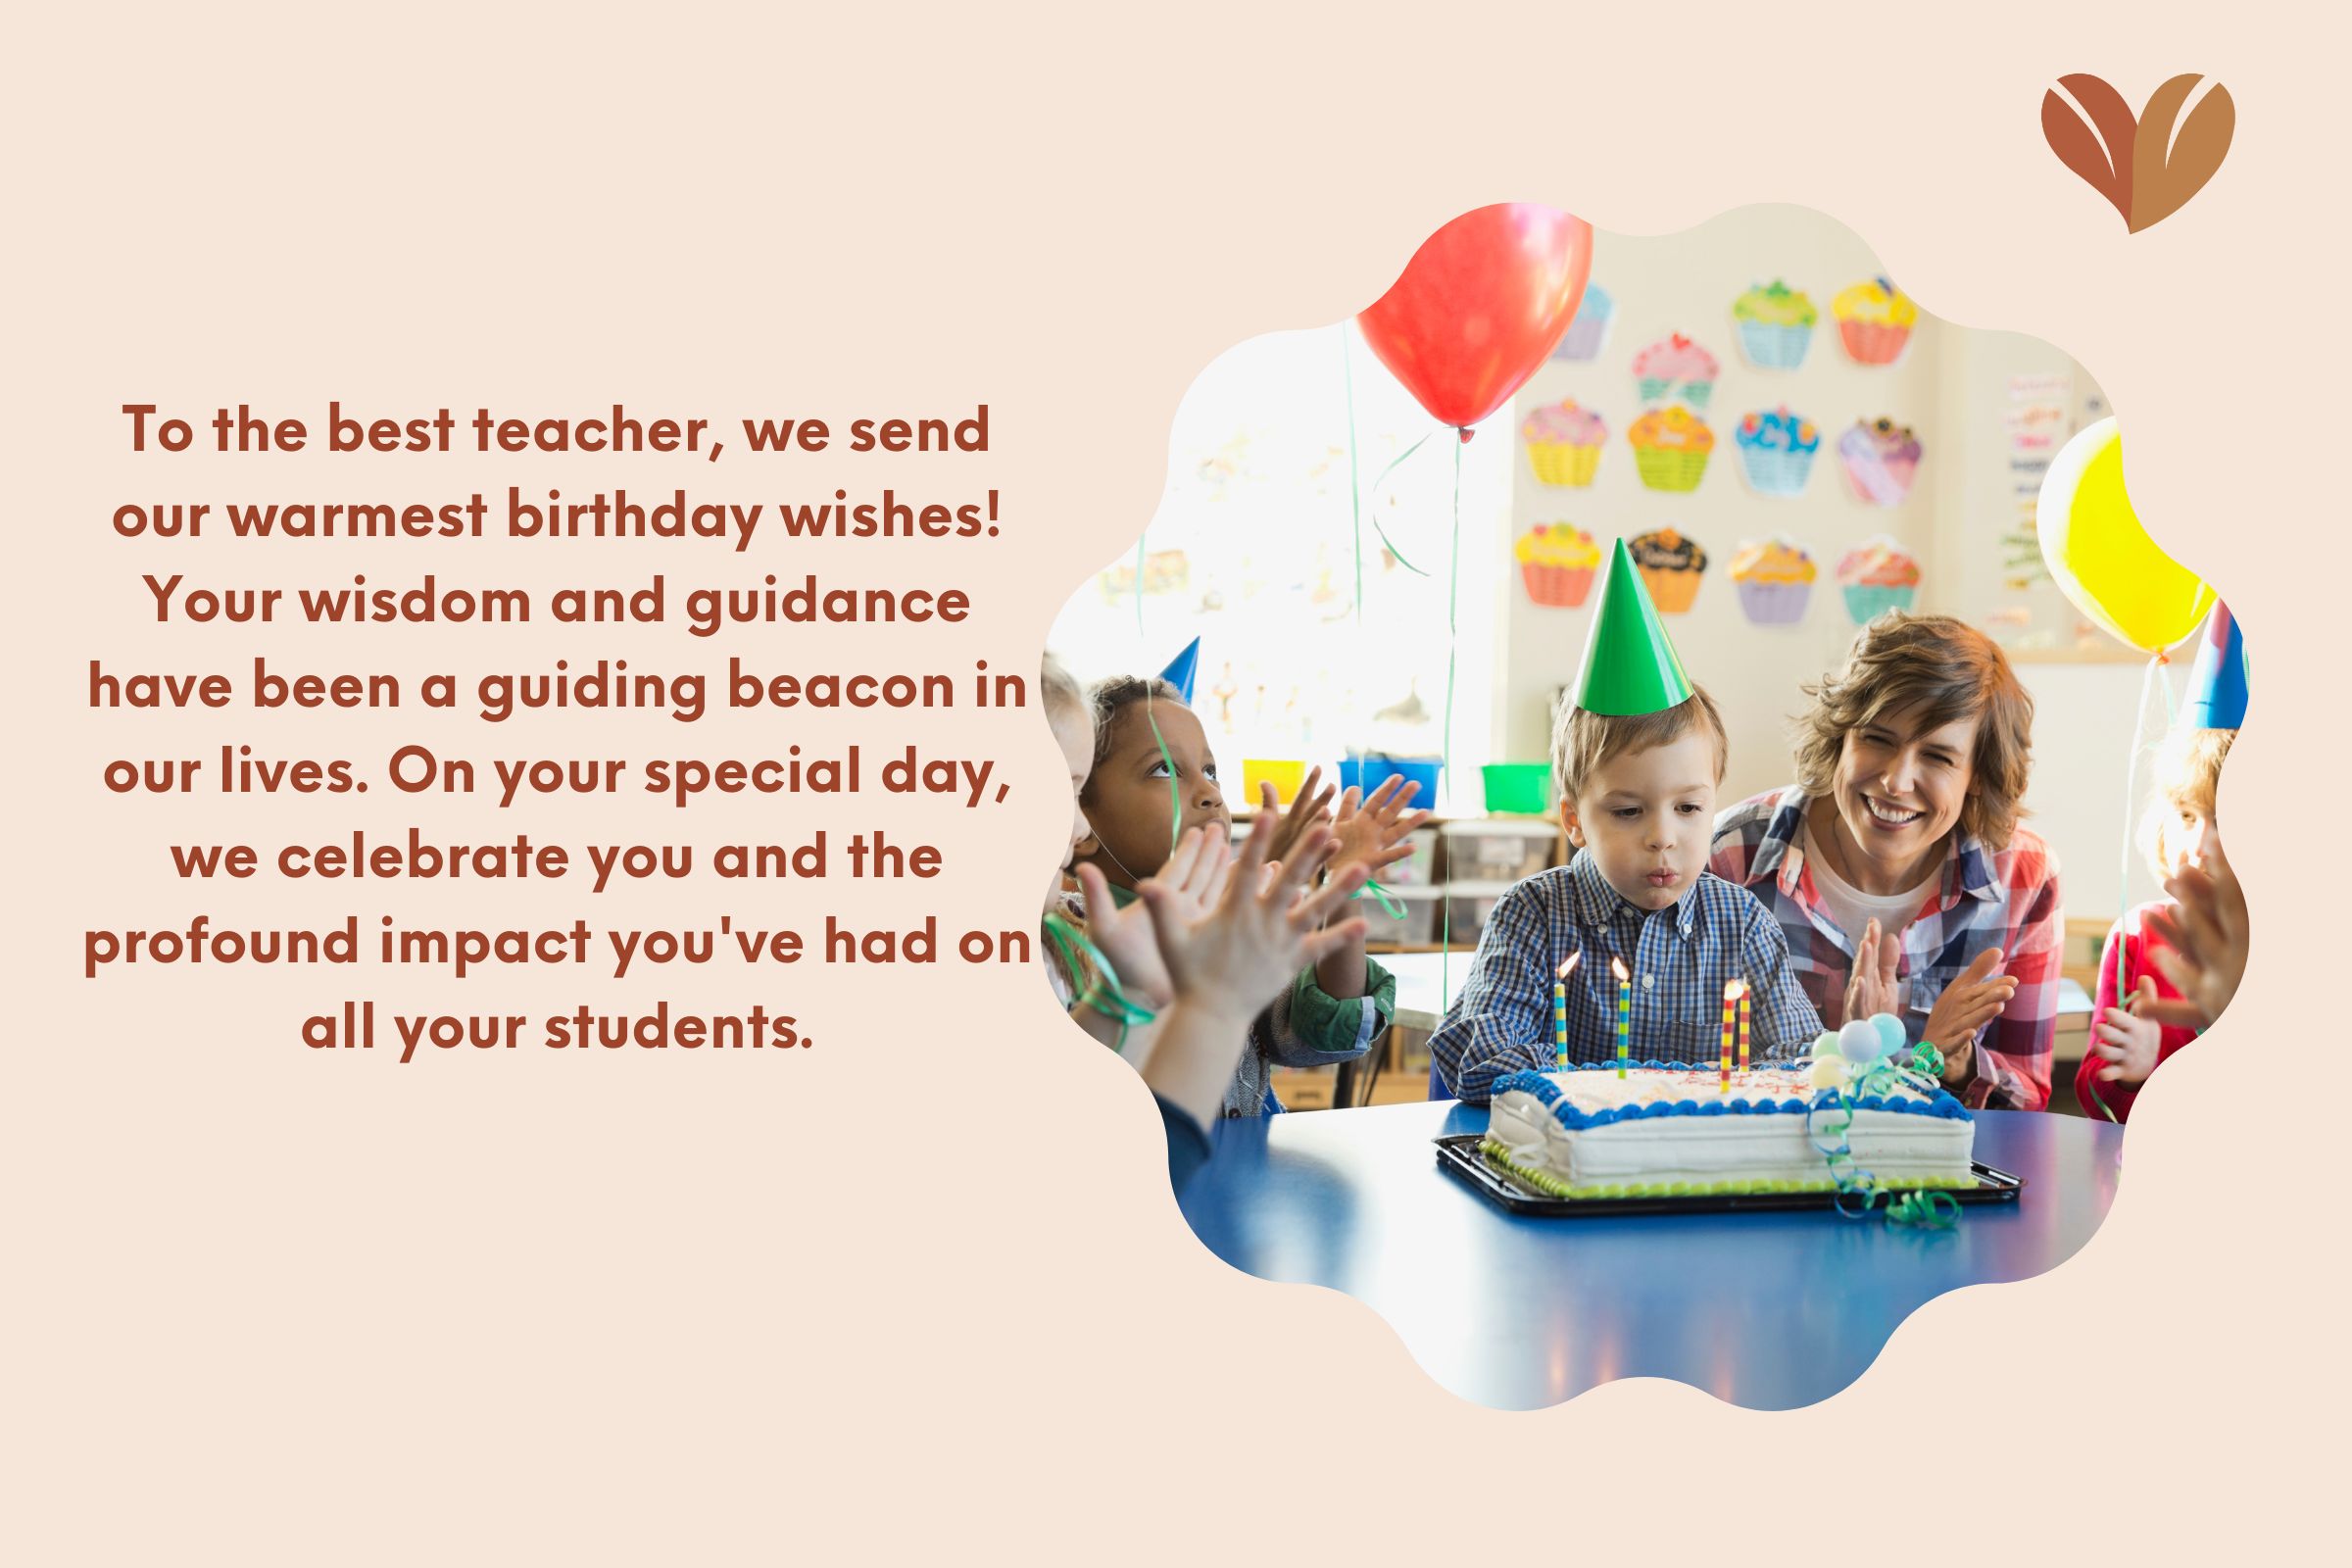 Knowledge-filled happy birthday wishes for teacher's special day.